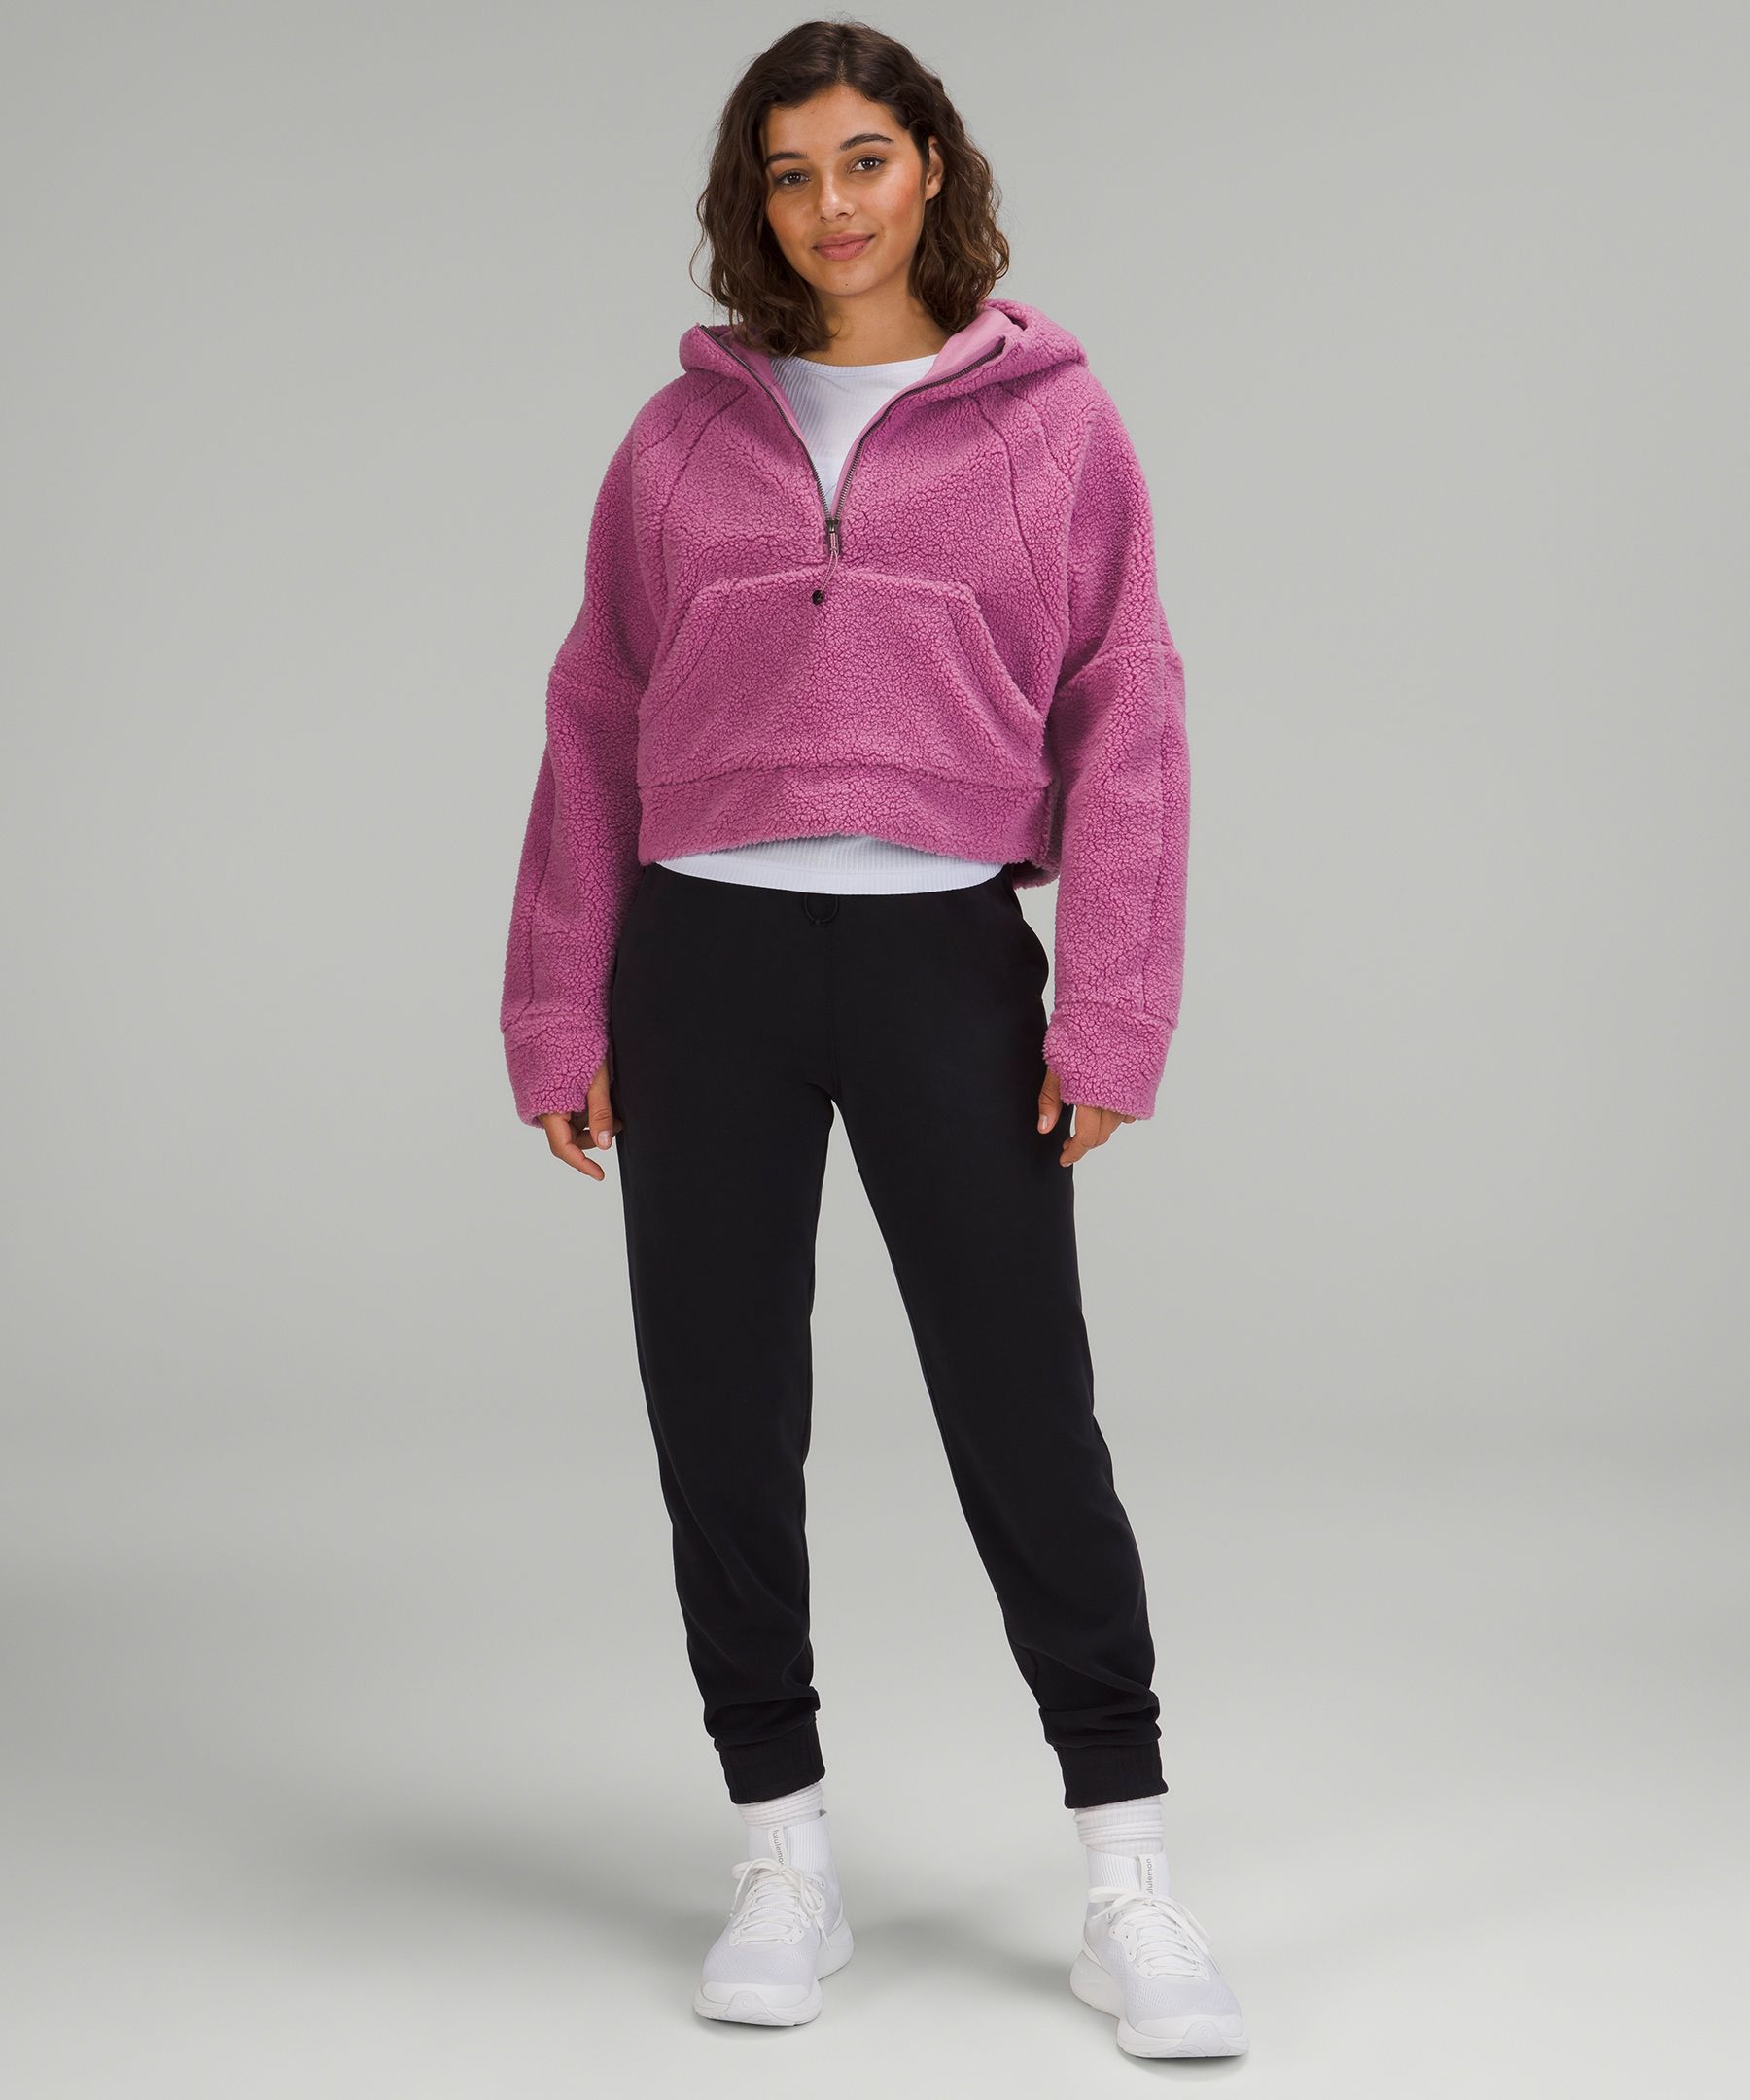 Scuba Oversized 1/2 zip sizing help! First 3 pics are XS/S and